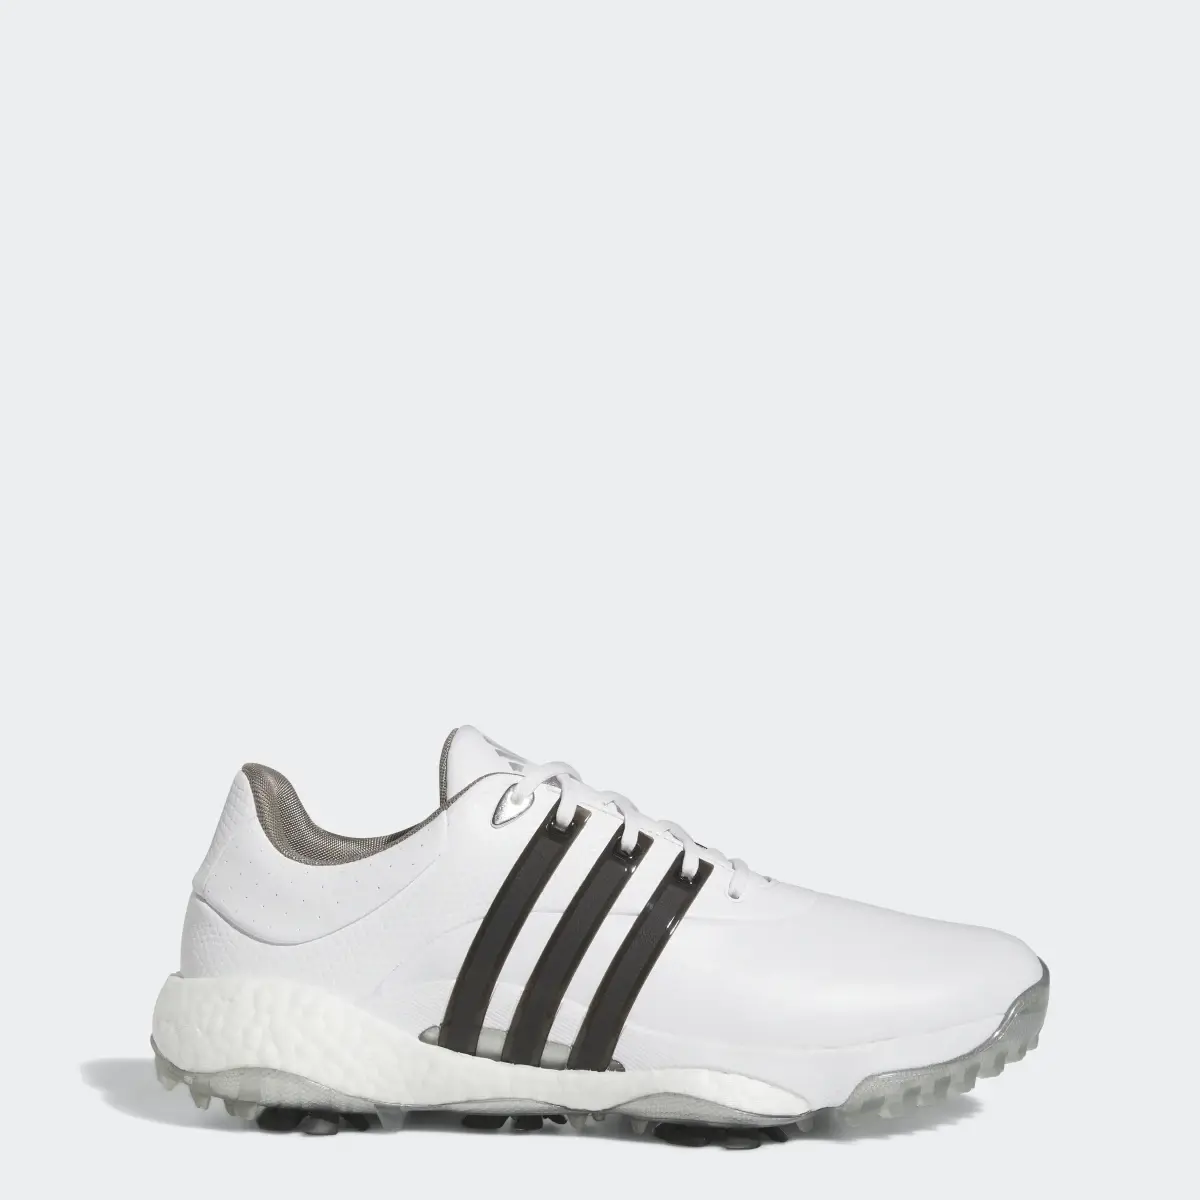 Adidas Tour360 22 BOOST Golf Shoes. 1